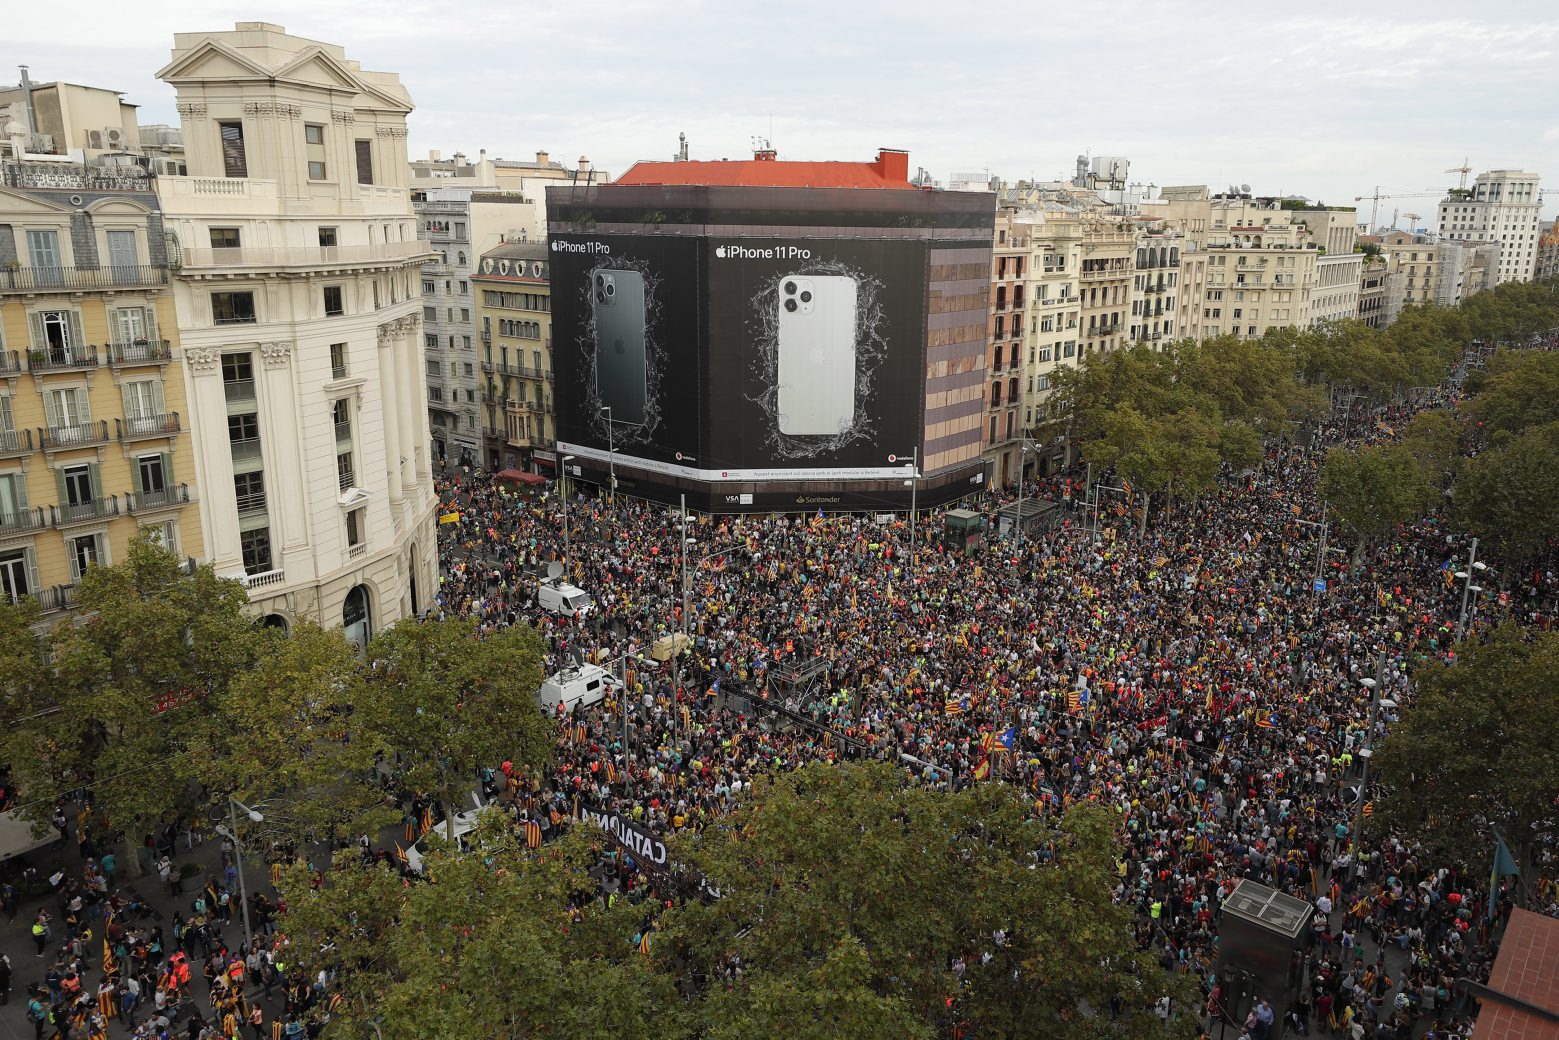 Protesters pack a street on the fifth day of protests over the conviction of a dozen Catalan independence leaders in Barcelona, Spain, Friday, Oct. 18, 2019. The Catalan regional capital is bracing for a fifth day of protests over the conviction of a dozen Catalan independence leaders. Five marches of tens of thousands from inland towns are converging in Barcelona's center for a mass protest. (AP Photo/Manu Fernandez) Spain Catalonia